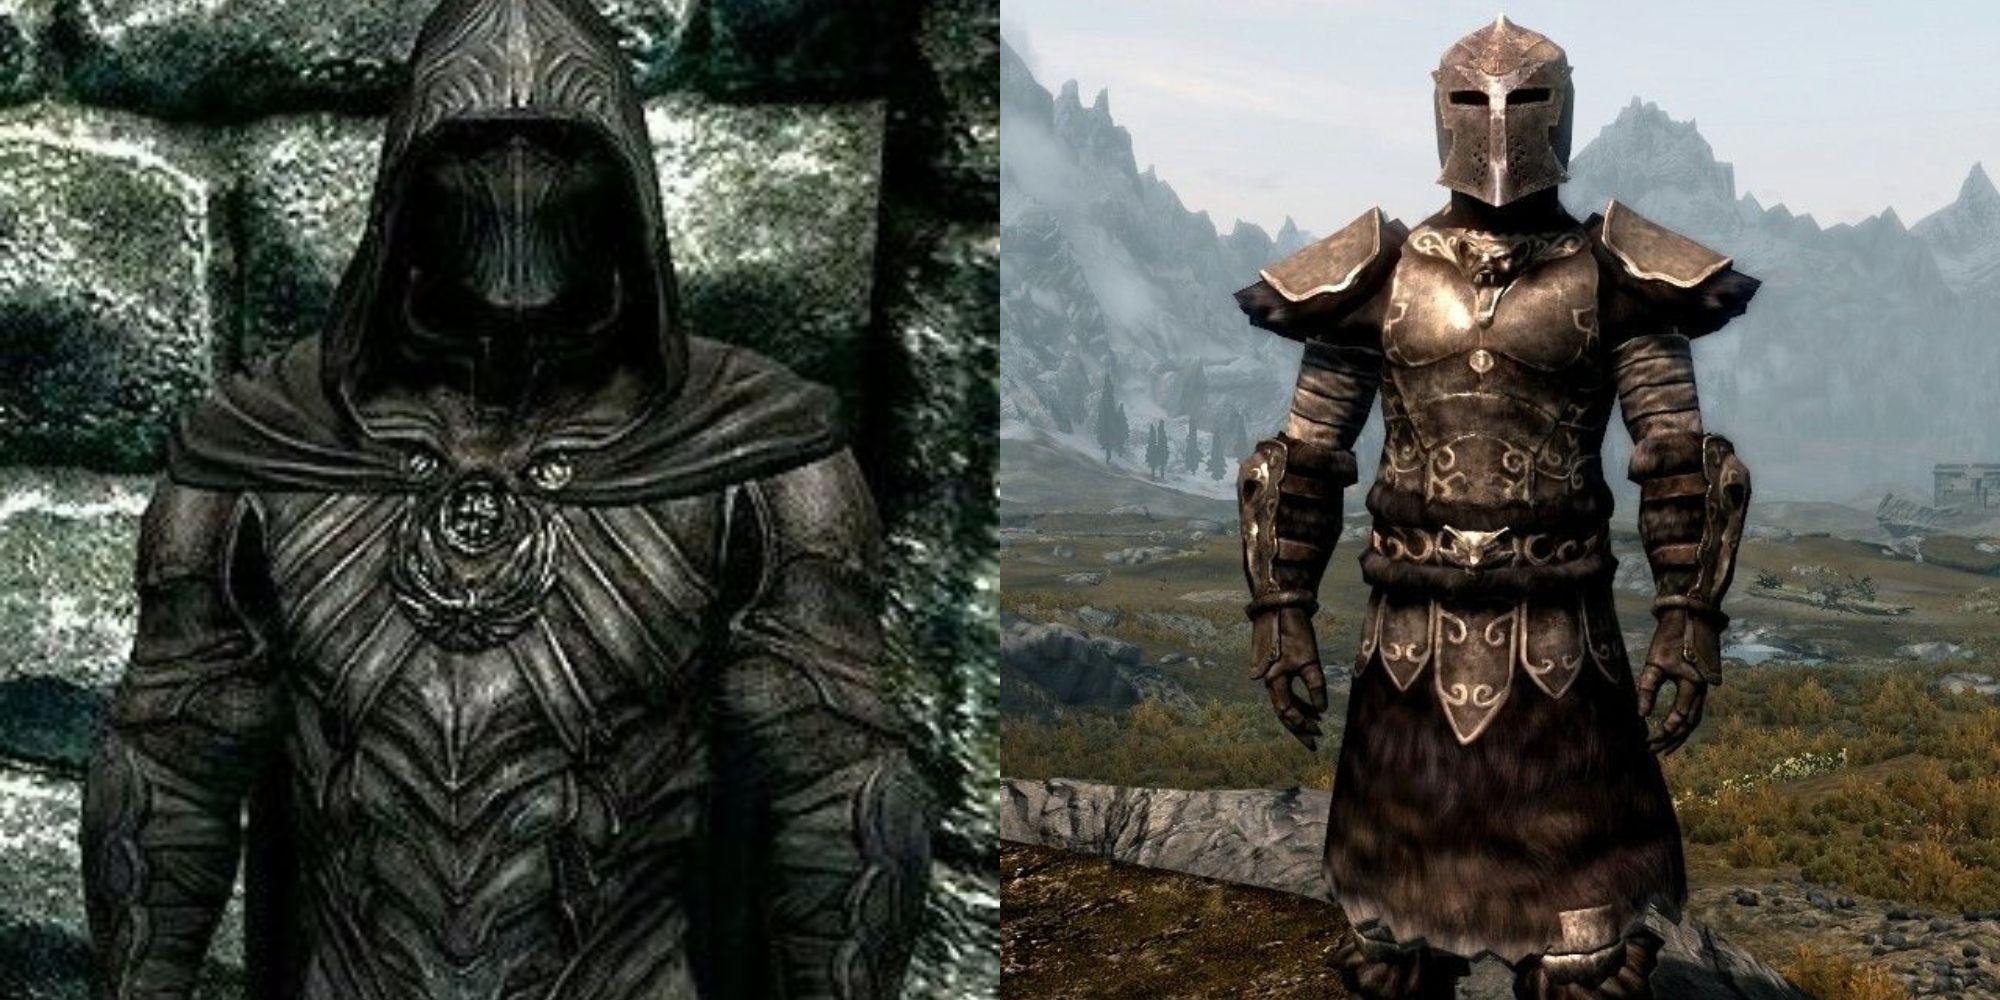 Skyrim: Ranking Every Playable Faction's Armor From Least To Most Powerful